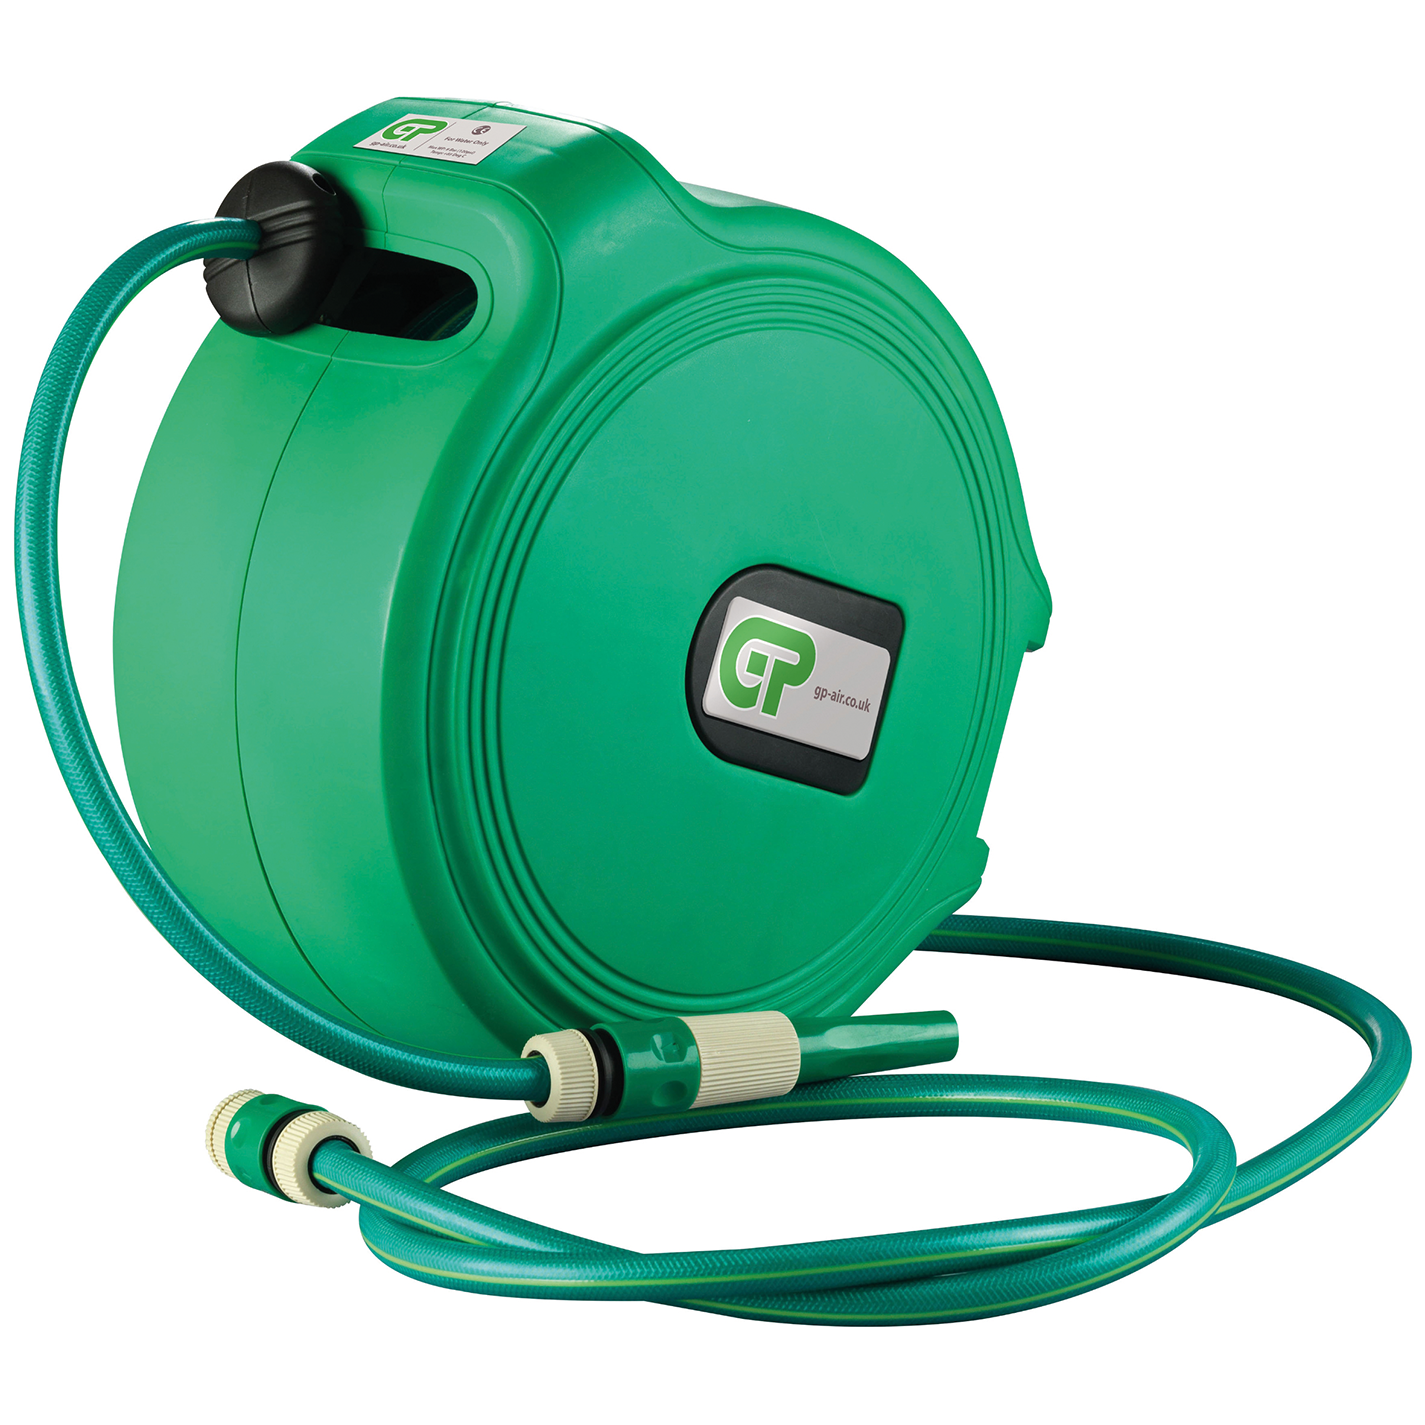 Retractable Water Hose Reel comes with Hose